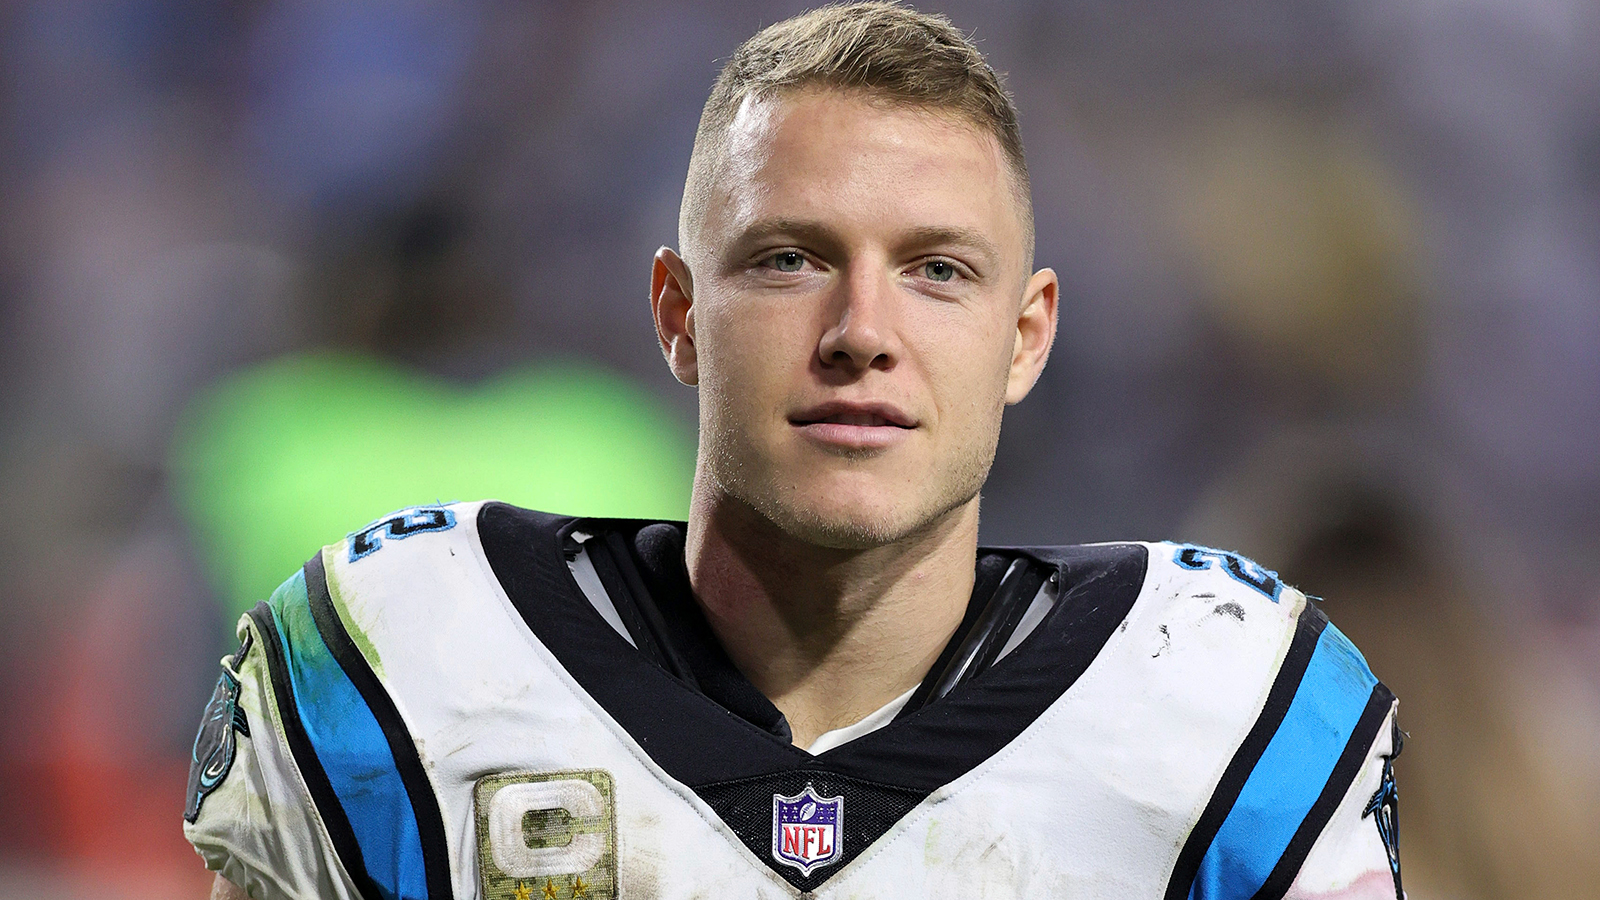 NFL: 49ers acquire RB Christian McCaffrey from Panthers